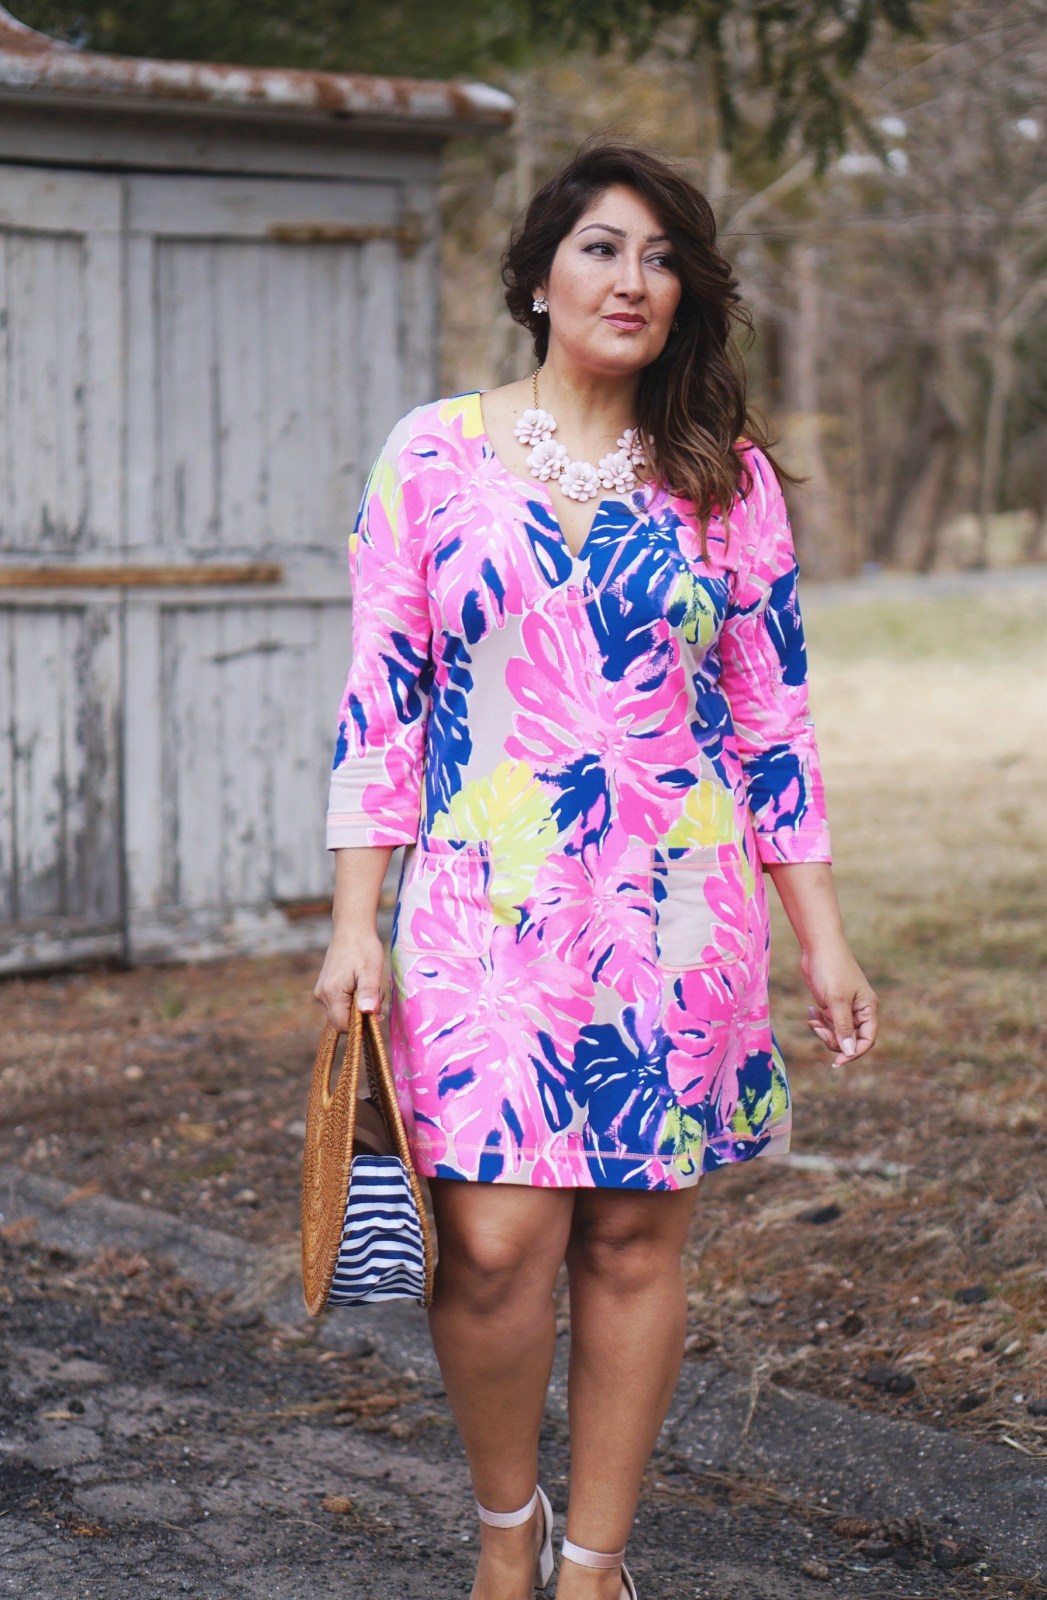 Lilly Pulitzer 'After Party Sale' begins now!